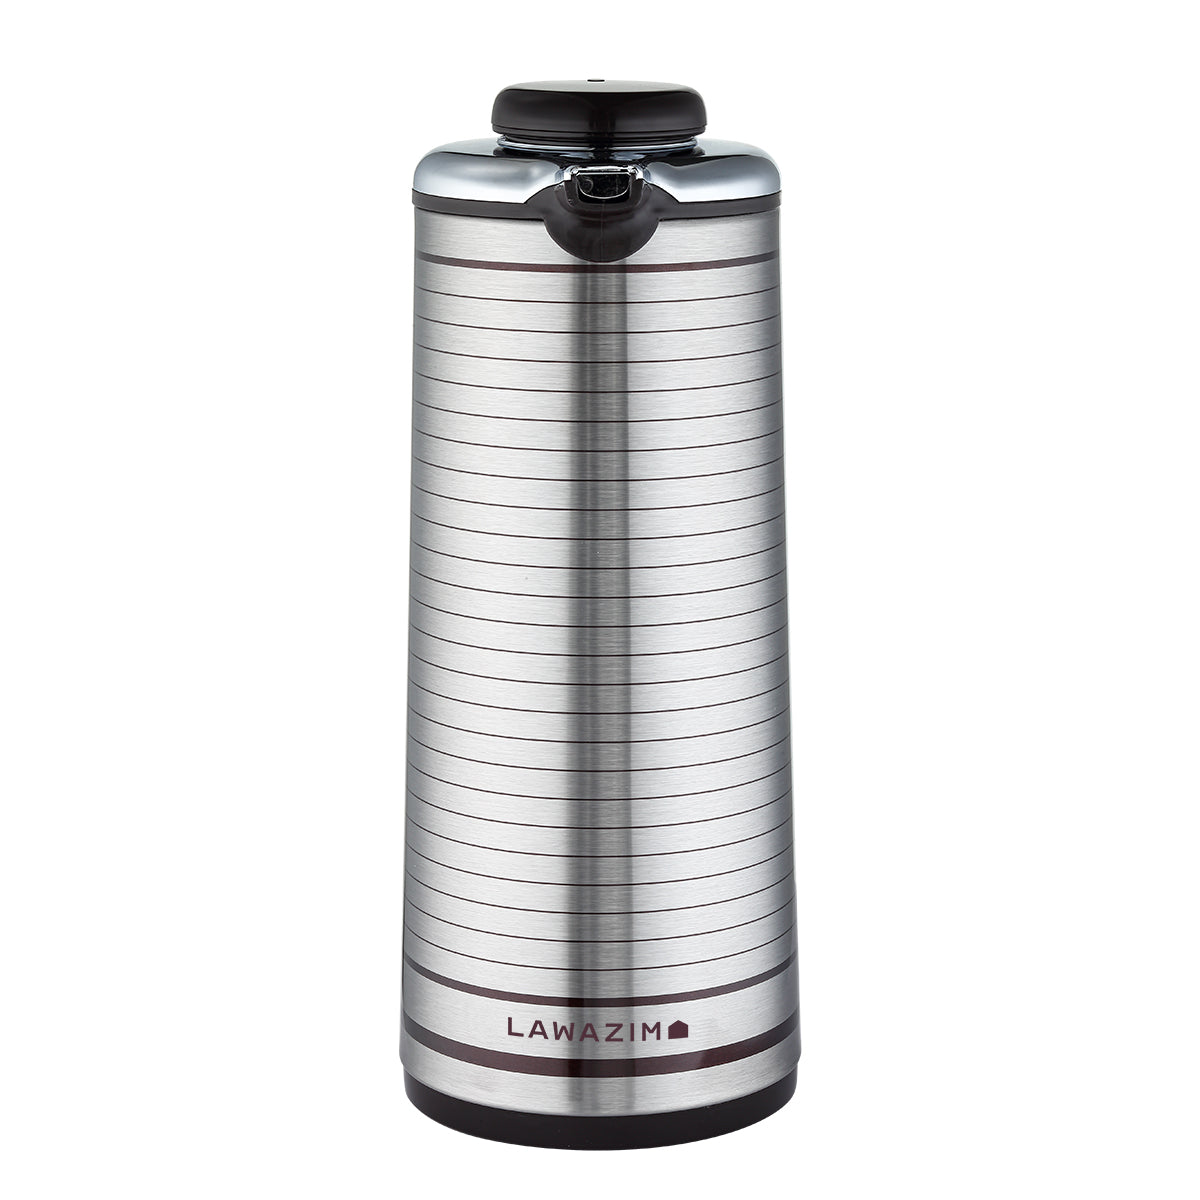 1.6L Coffee/Tea Thermos Flask - Stainless Steel